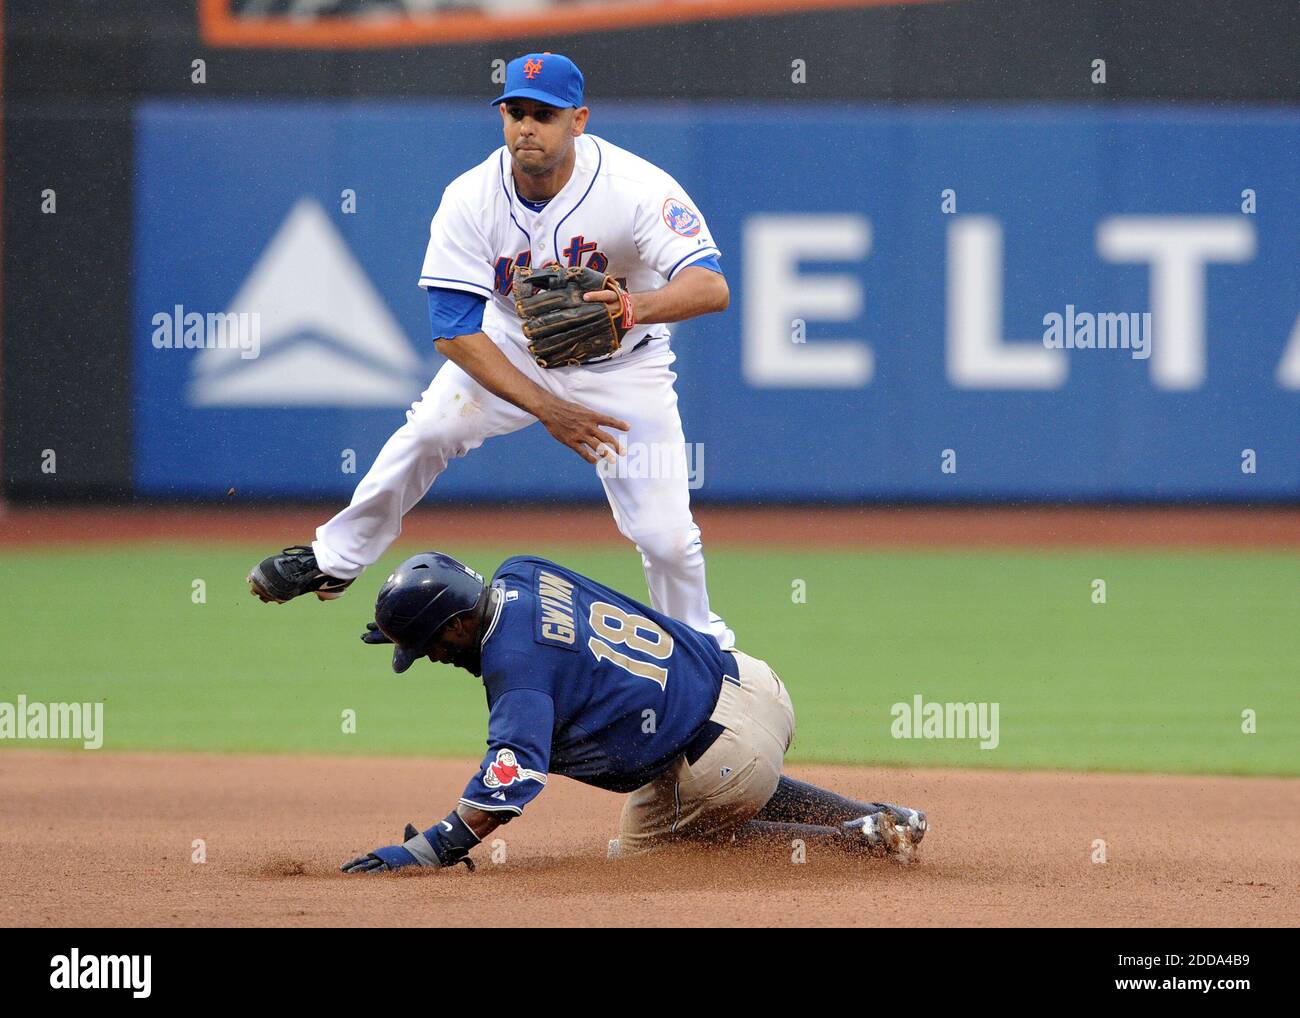 NO FILM, NO VIDEO, NO TV, NO DOCUMENTARY - New York Mets second baseman Alex Cora (13) completes a double play in the top of the seventh inning during the MLB Baseball match, New York Mets vs San Diego Padres at CitiField in New York City, USA on June 10, 2010. Photo by Christopher Pasatieri/MCT/ABACAPRESS.COM Stock Photo